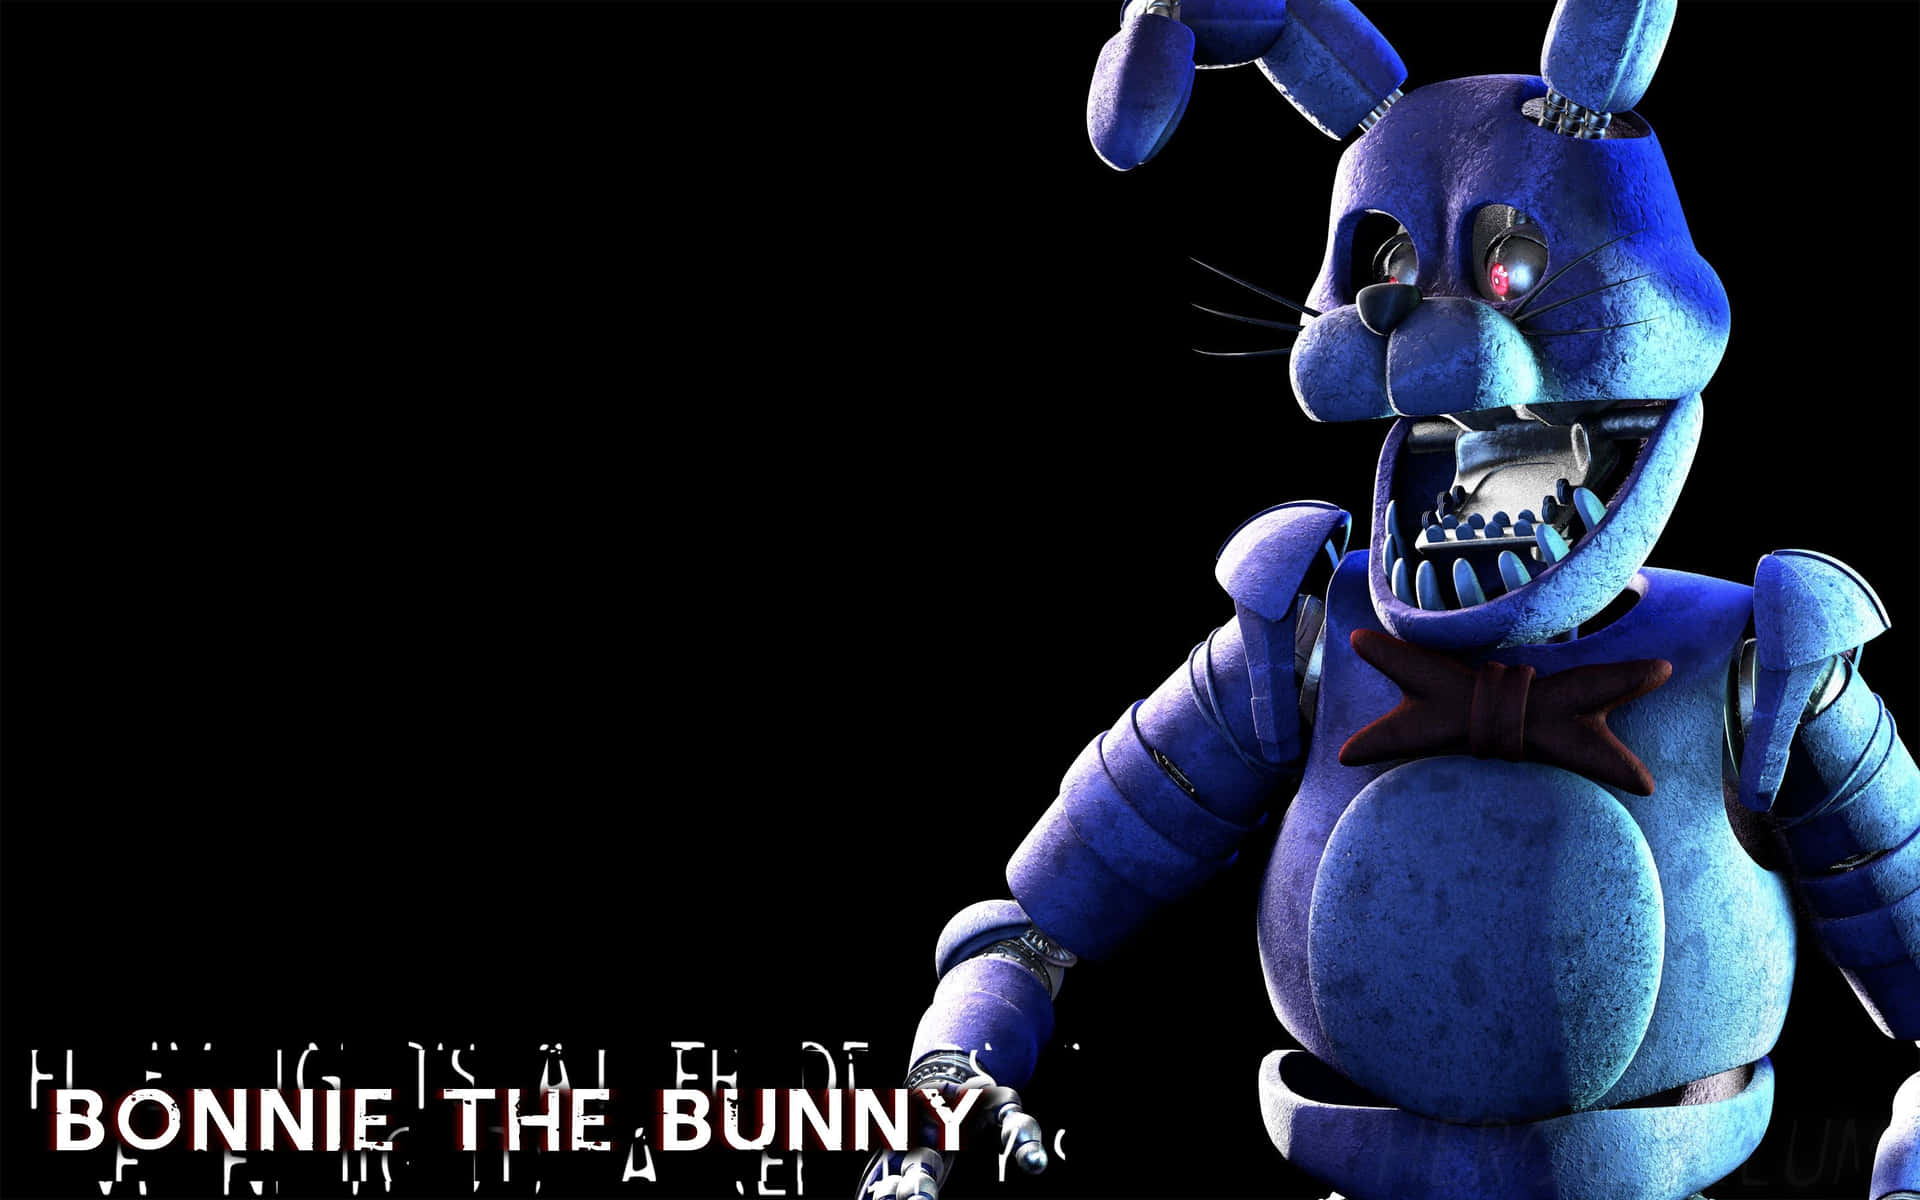 Bonnie The Bunny in its haunting glory Wallpaper